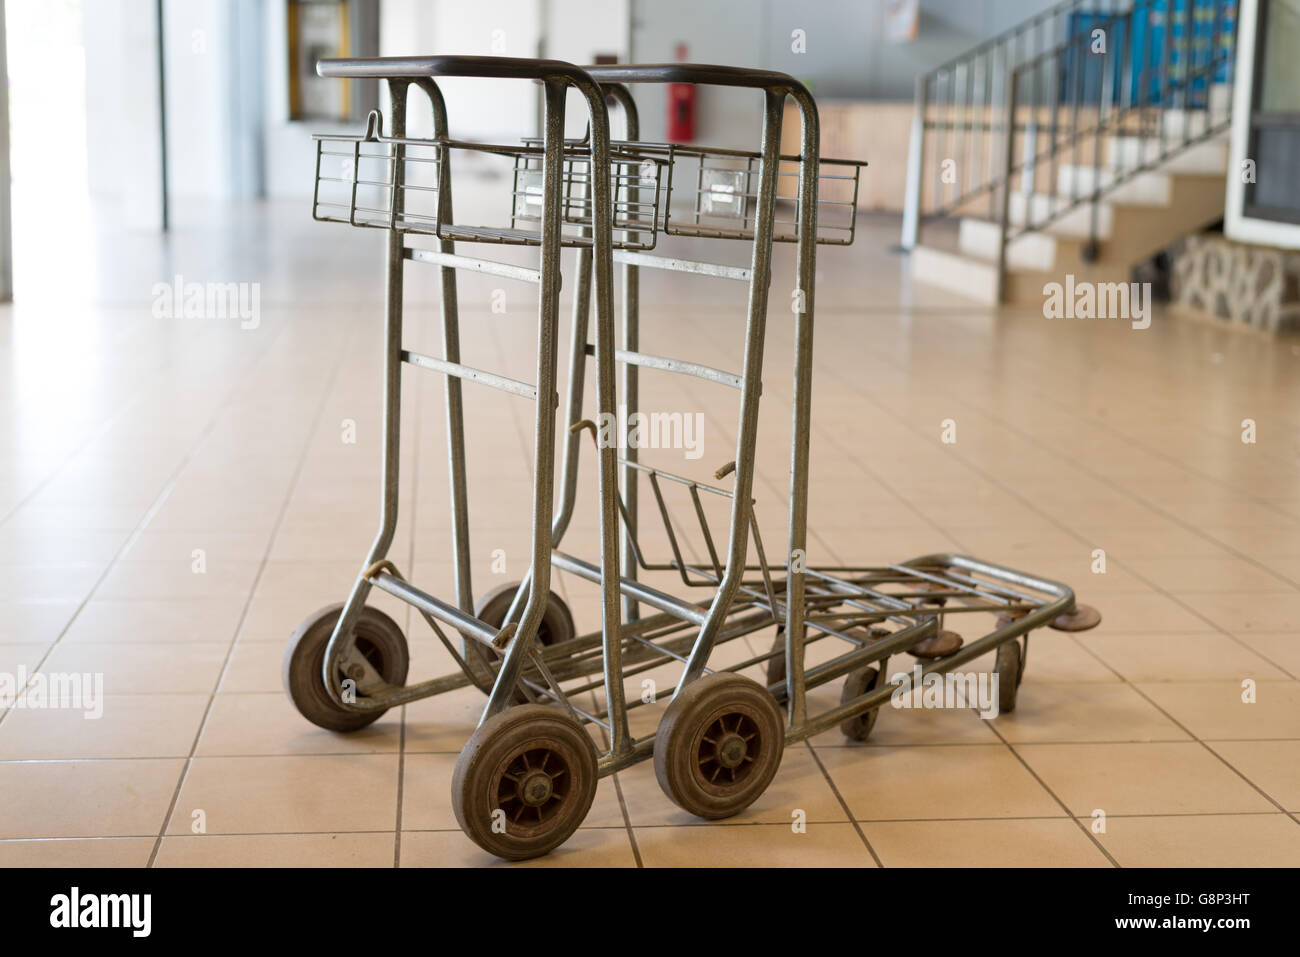 Two abandoned empty old airport luggage cart Stock Photo